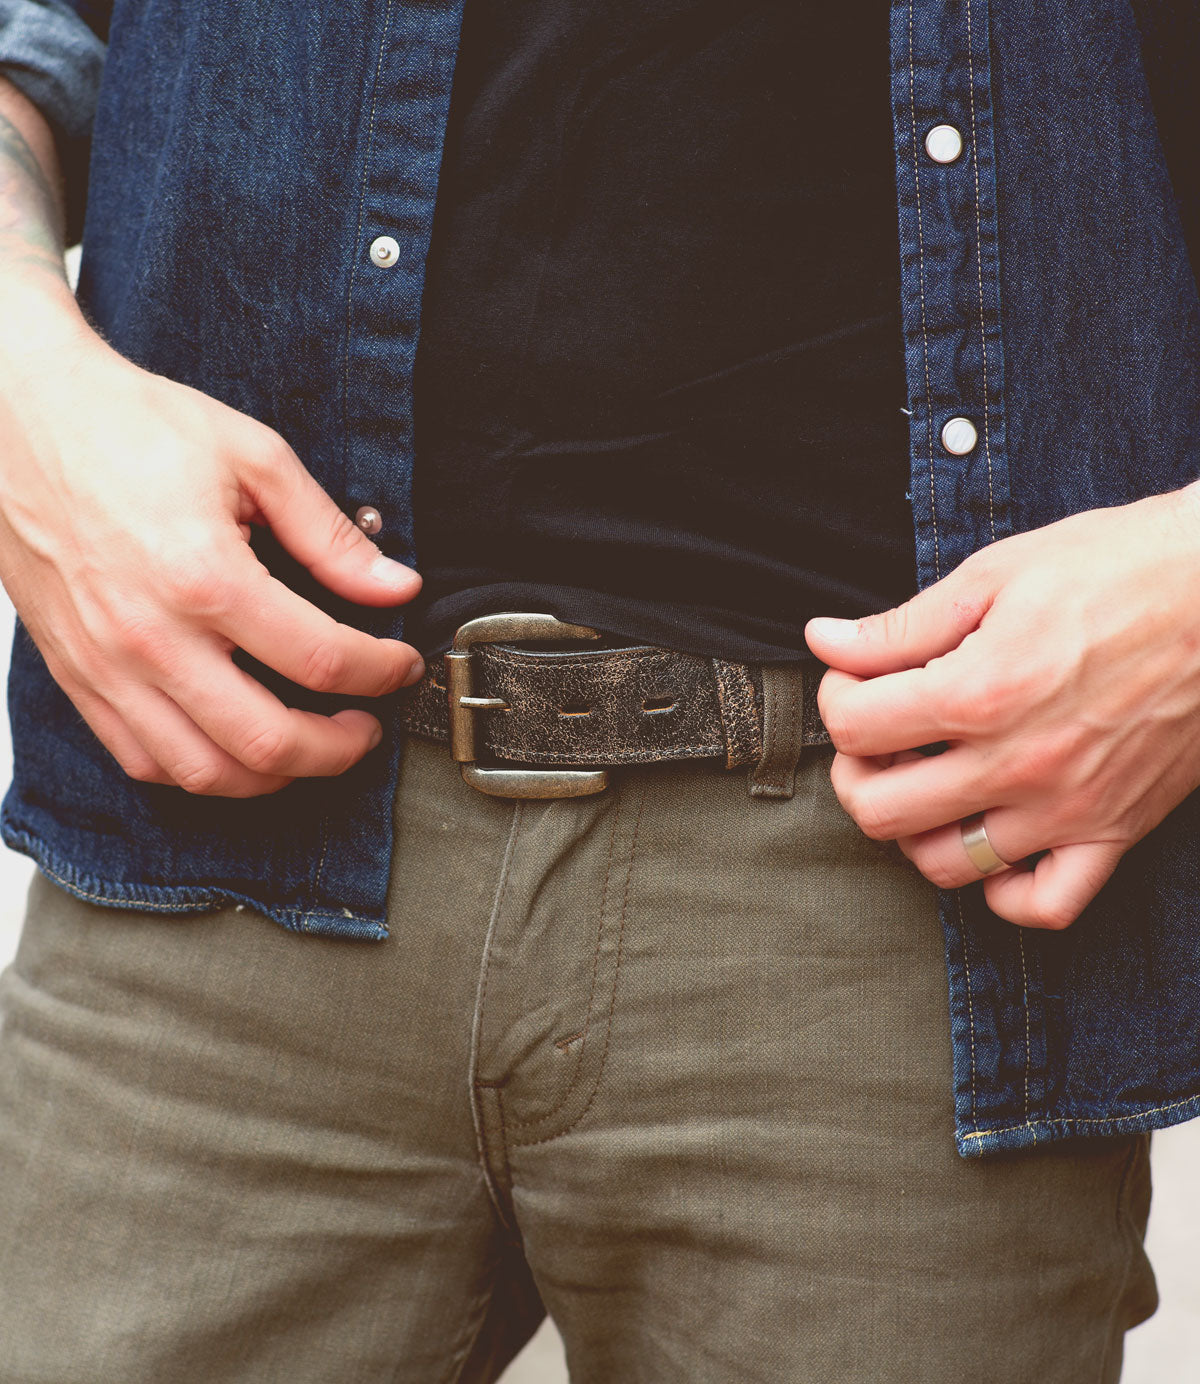 A person dressed in a denim shirt and dark pants adjusts their Bed Stu Meander made of genuine distressed leather with a removable antique metal buckle using both hands.